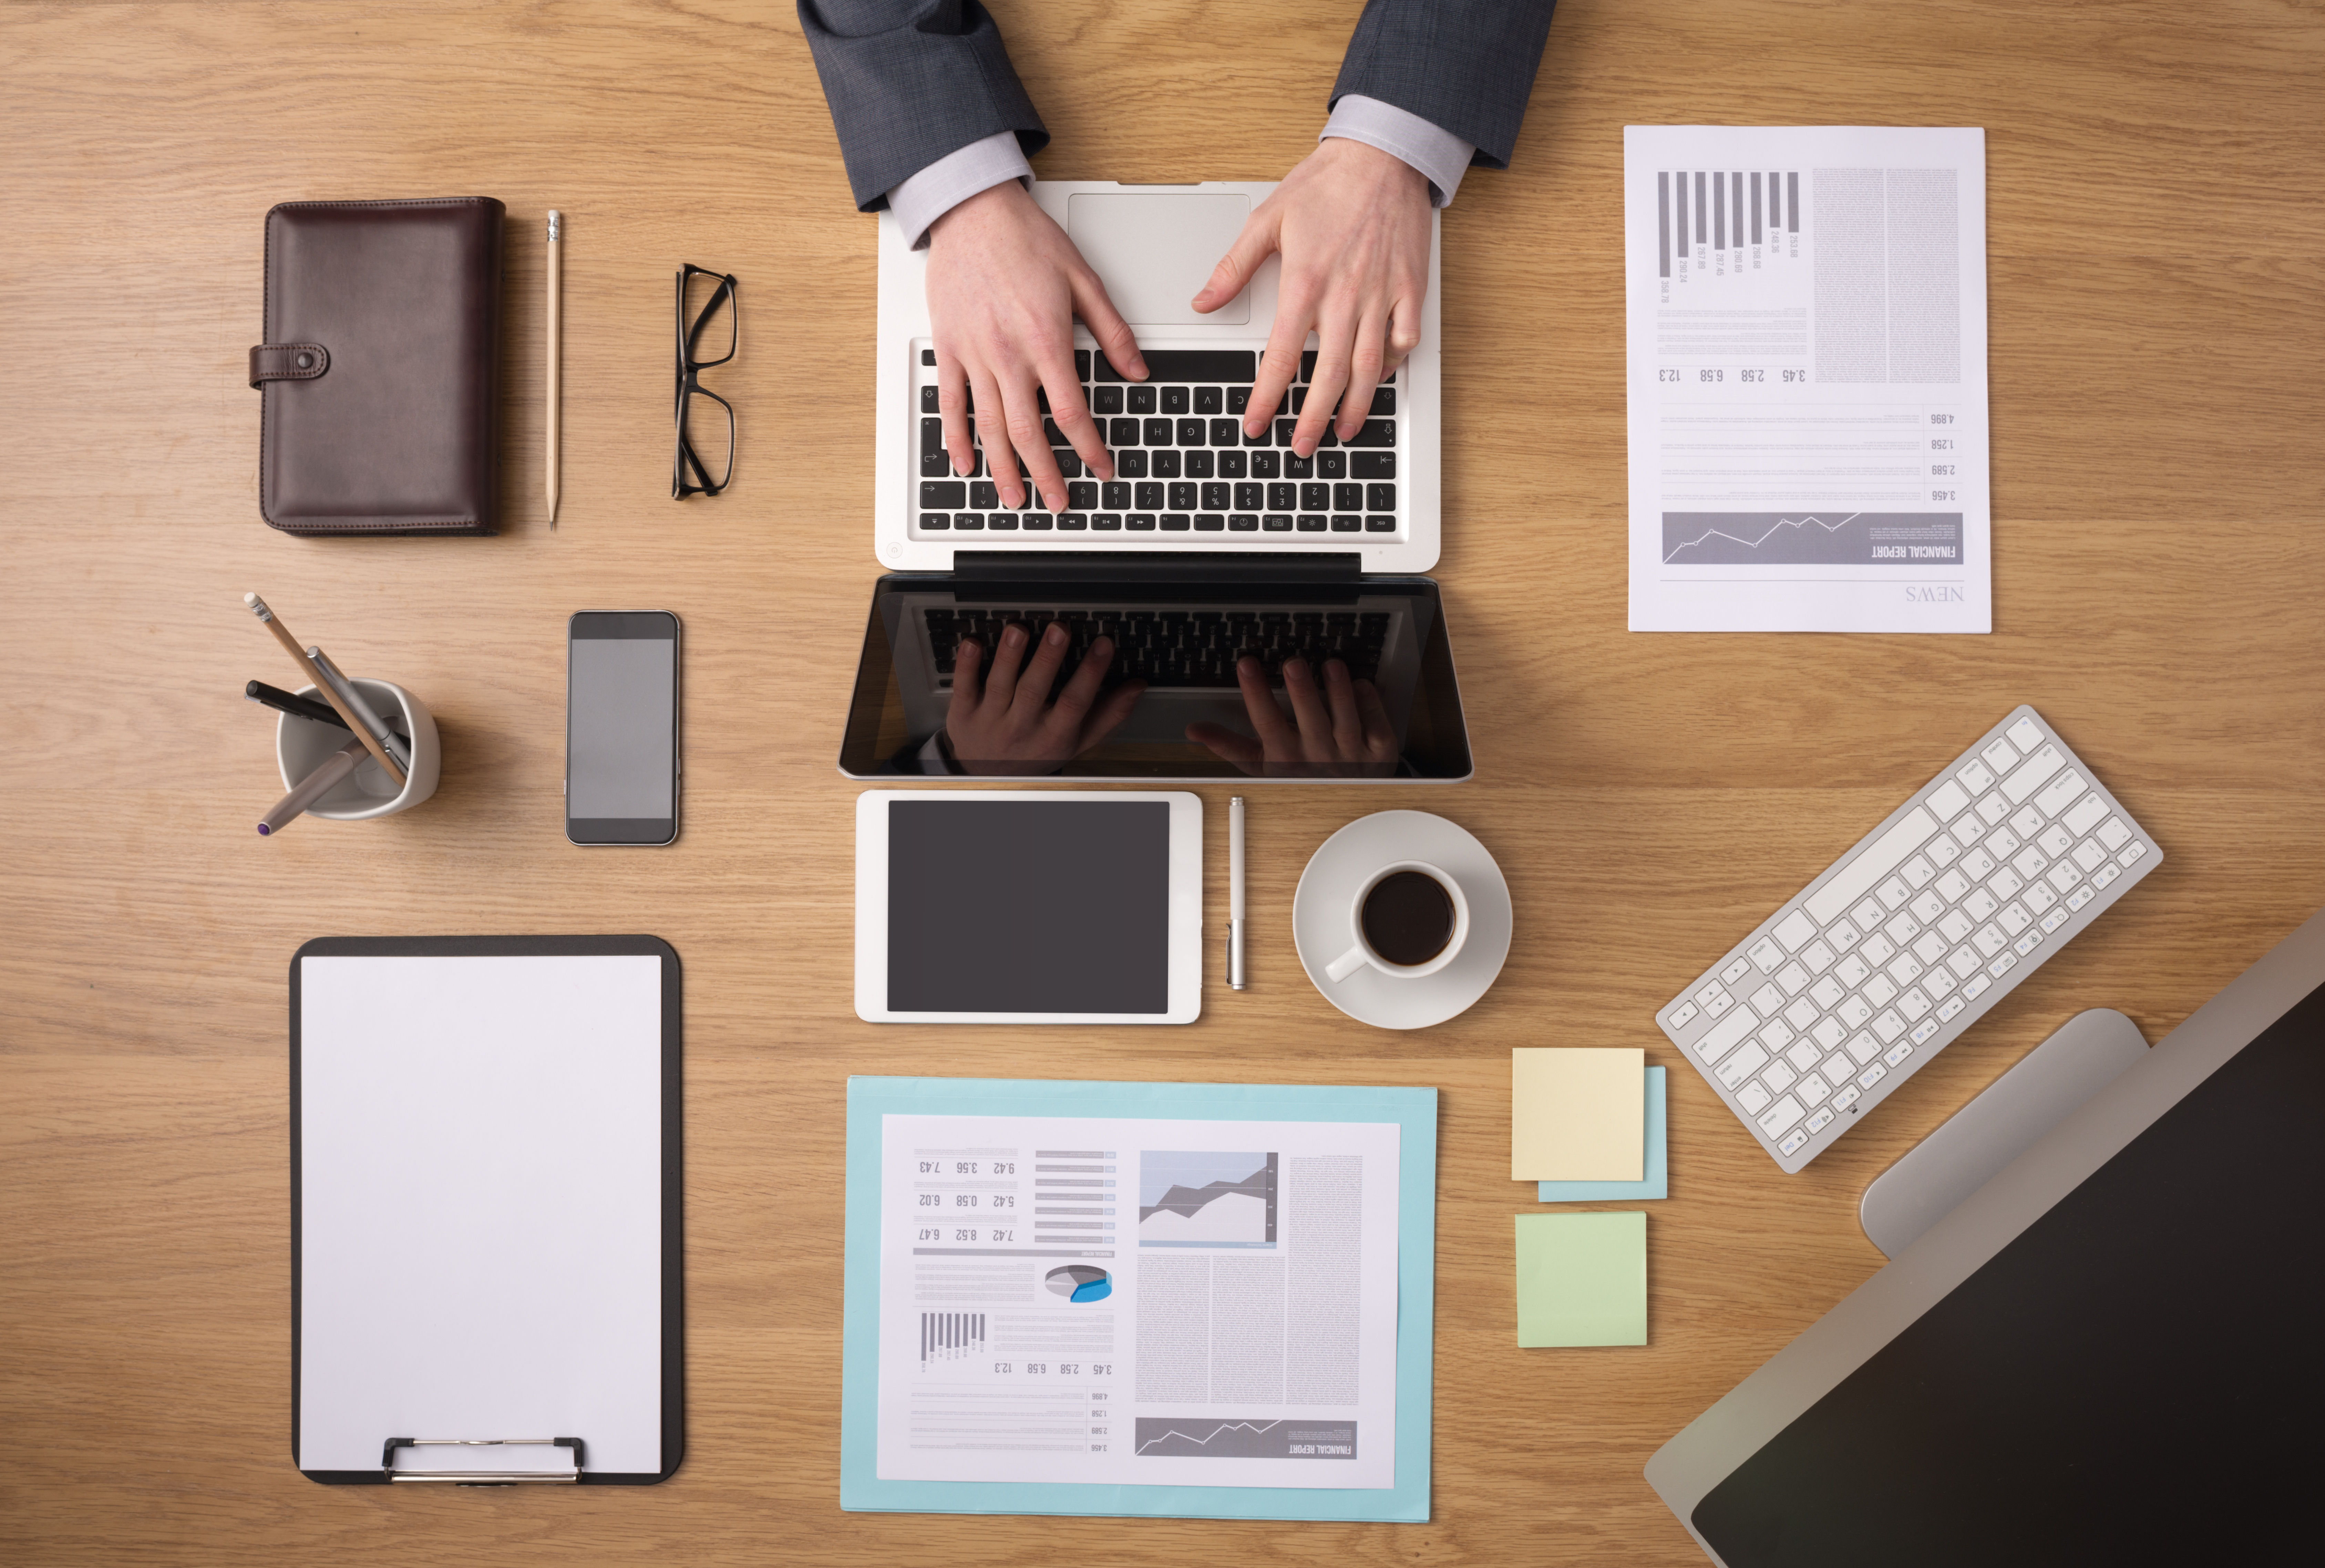 New year, new plan: It’s a good time for small business owners to tackle office organization